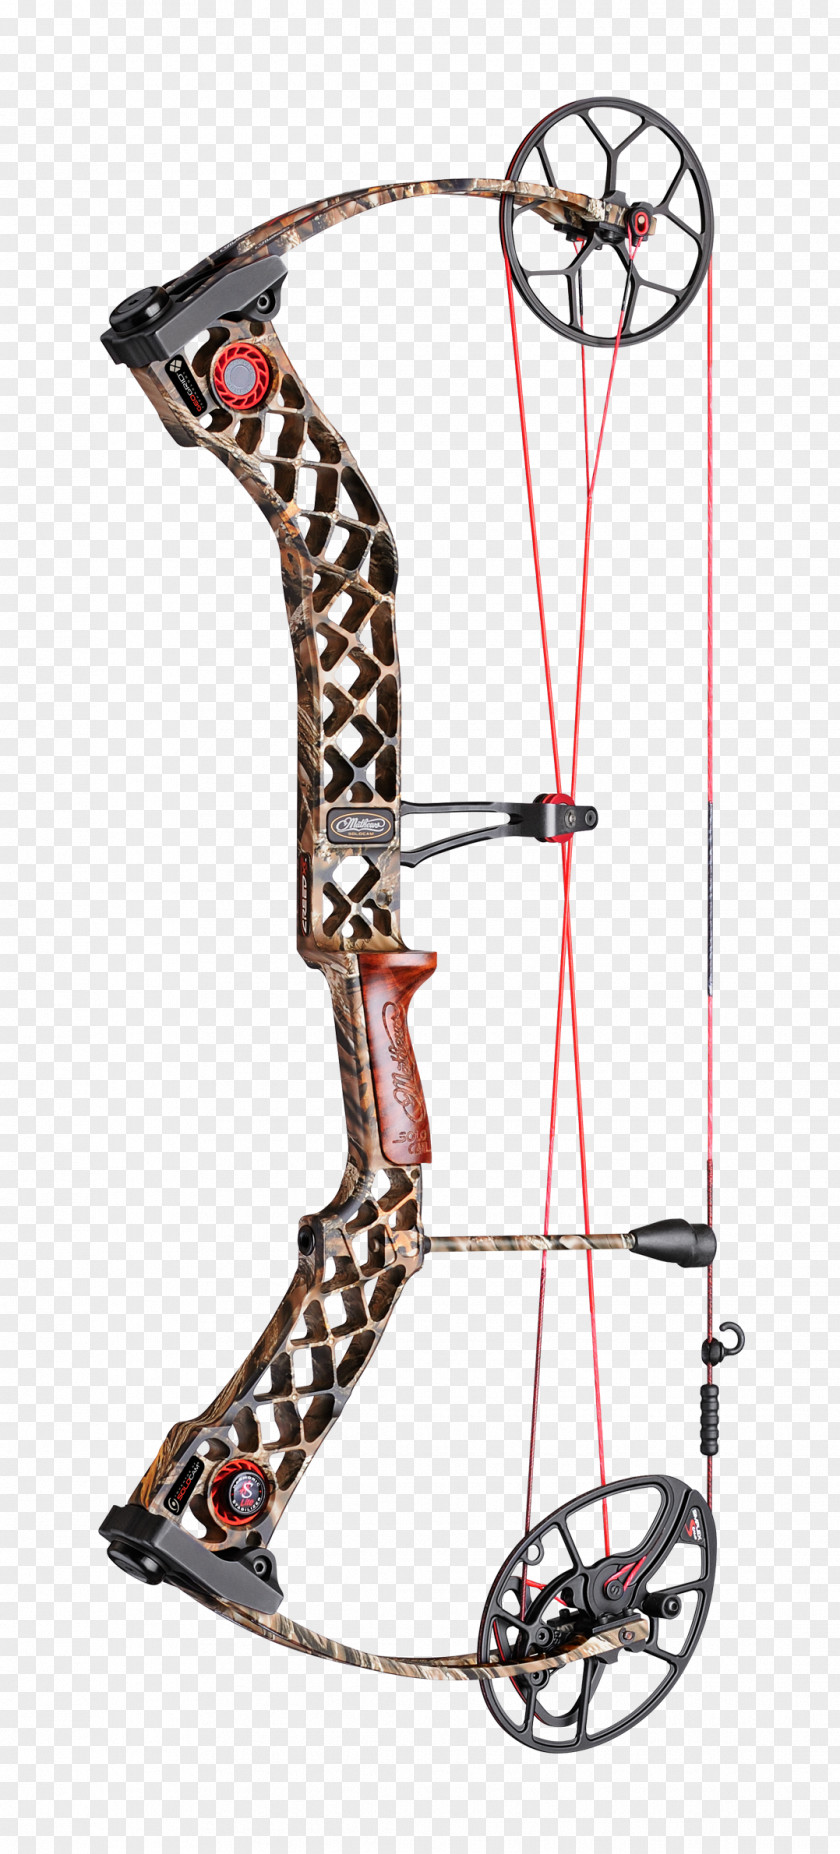 Arrow Bowhunting Compound Bows Bow And PNG